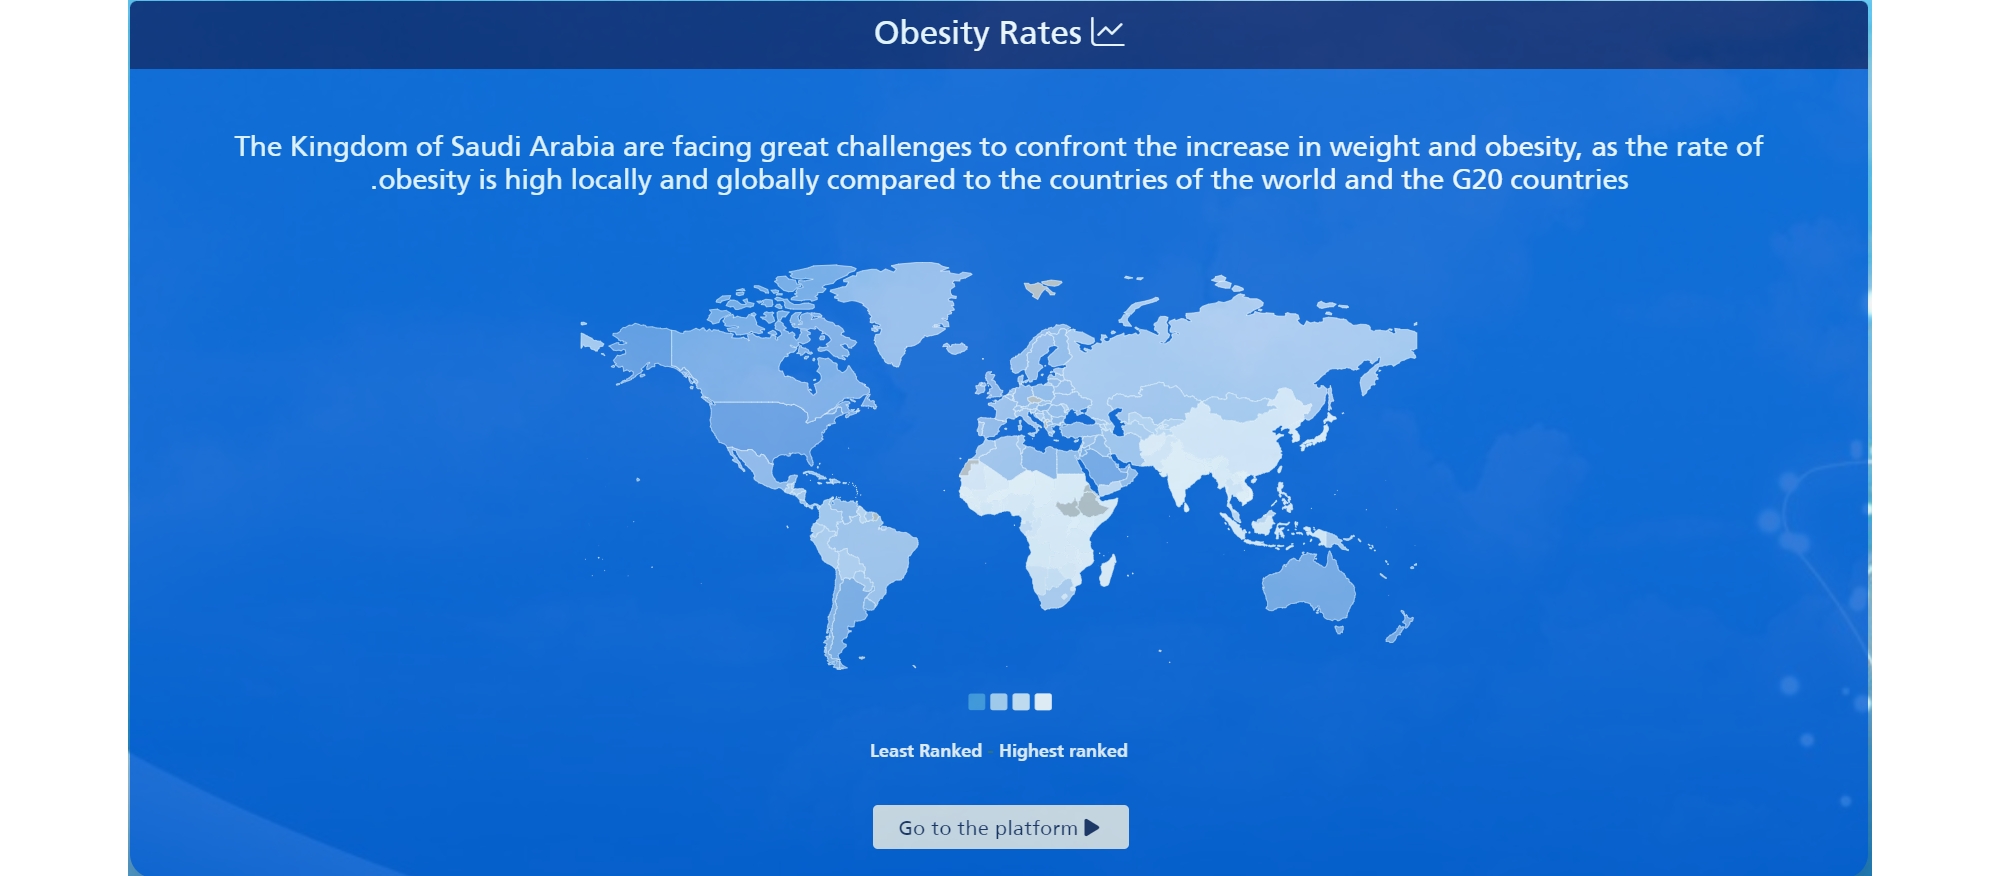 The National Platform to Reduce Obesity and Overweight